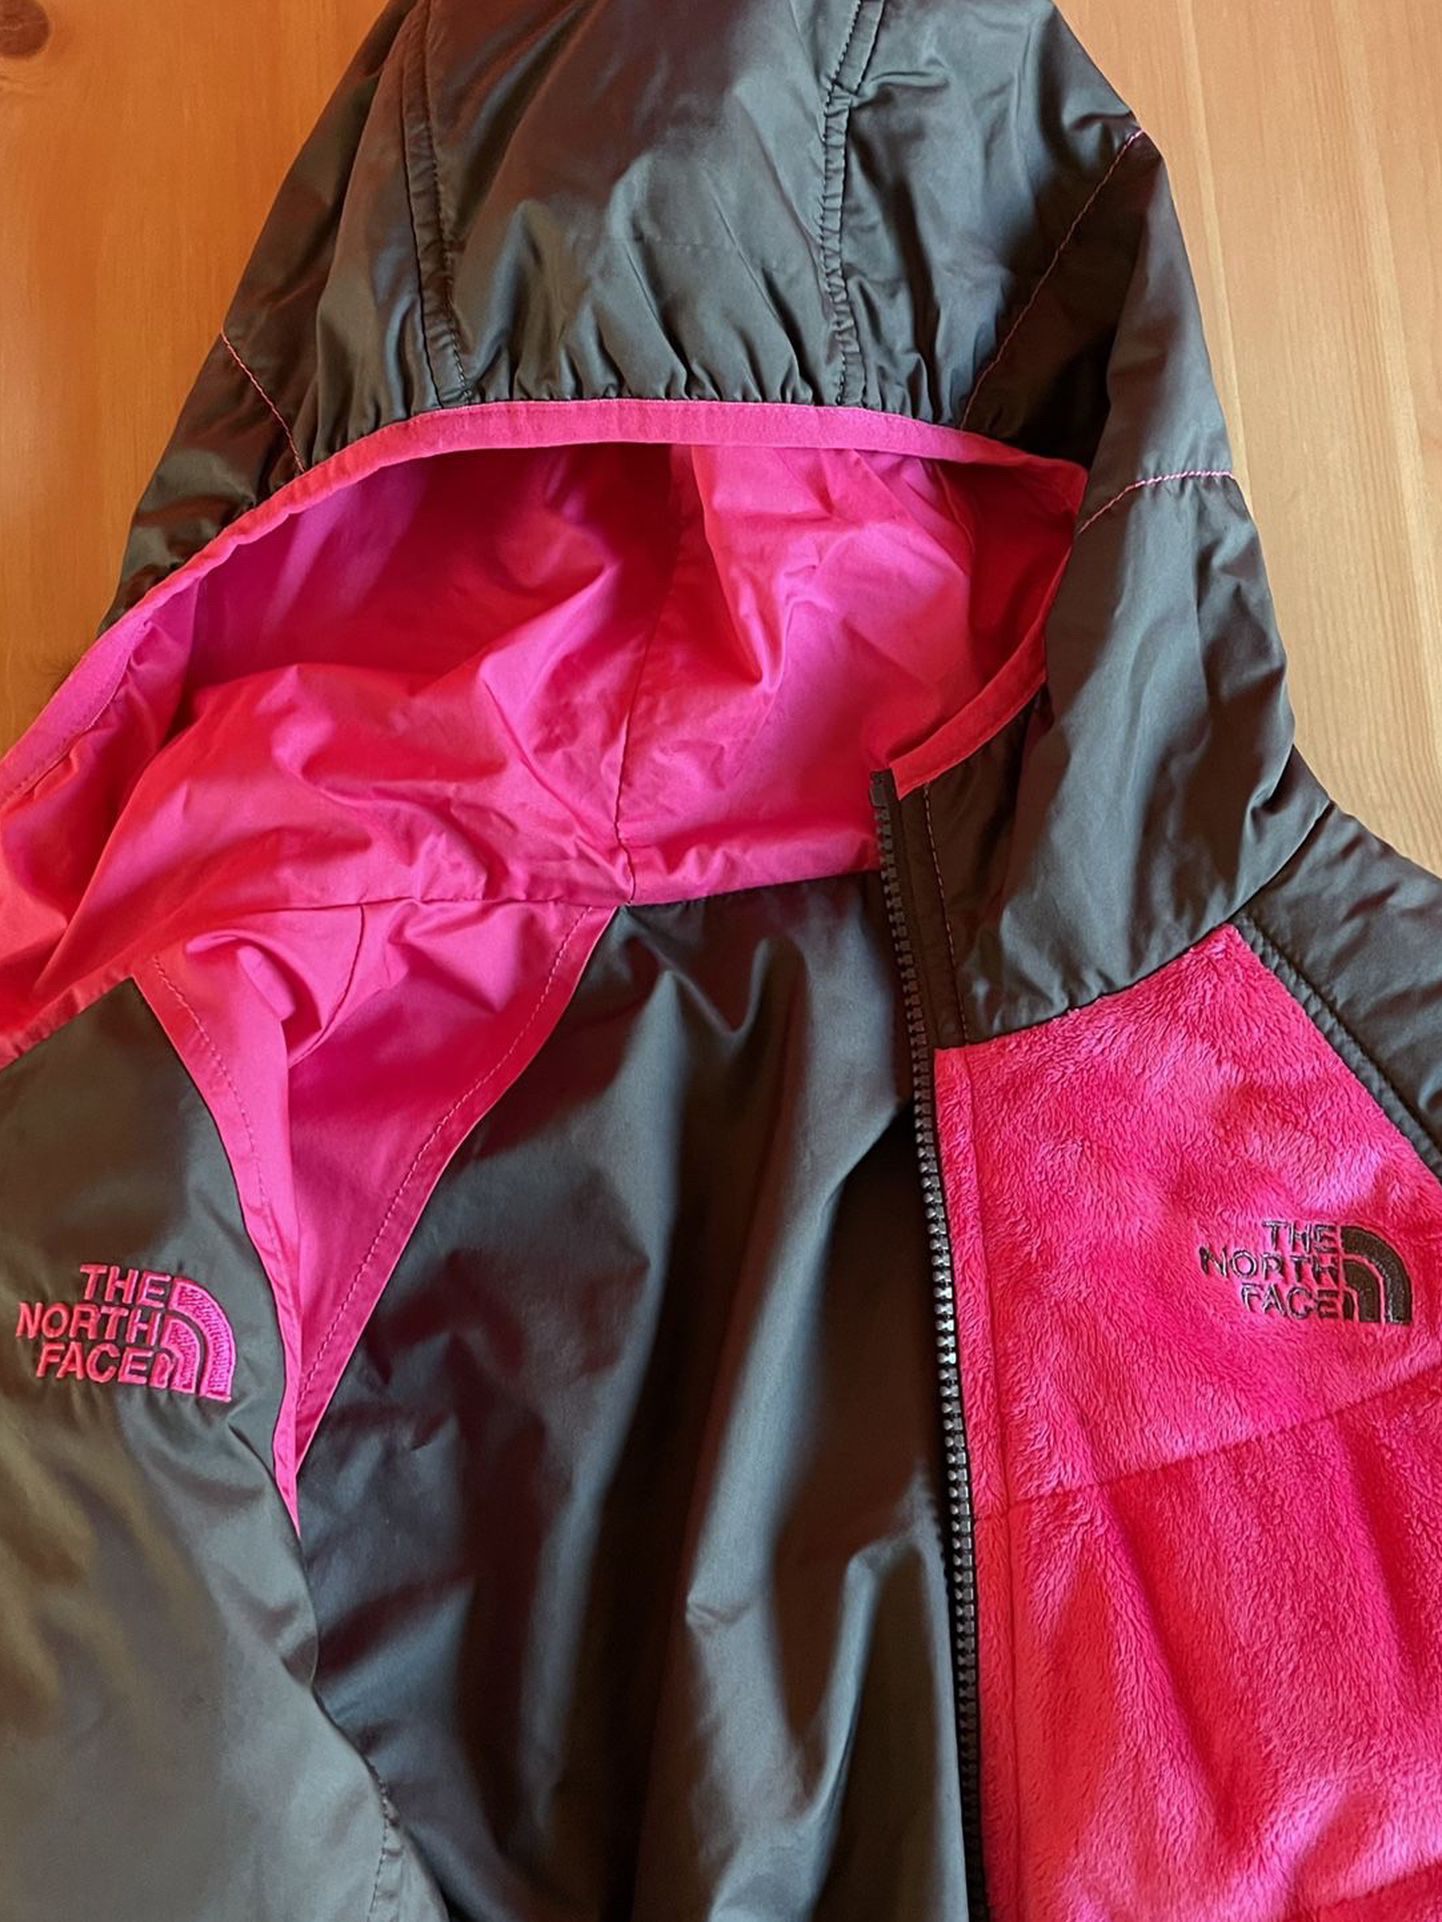 The North Face Reversible Jacket